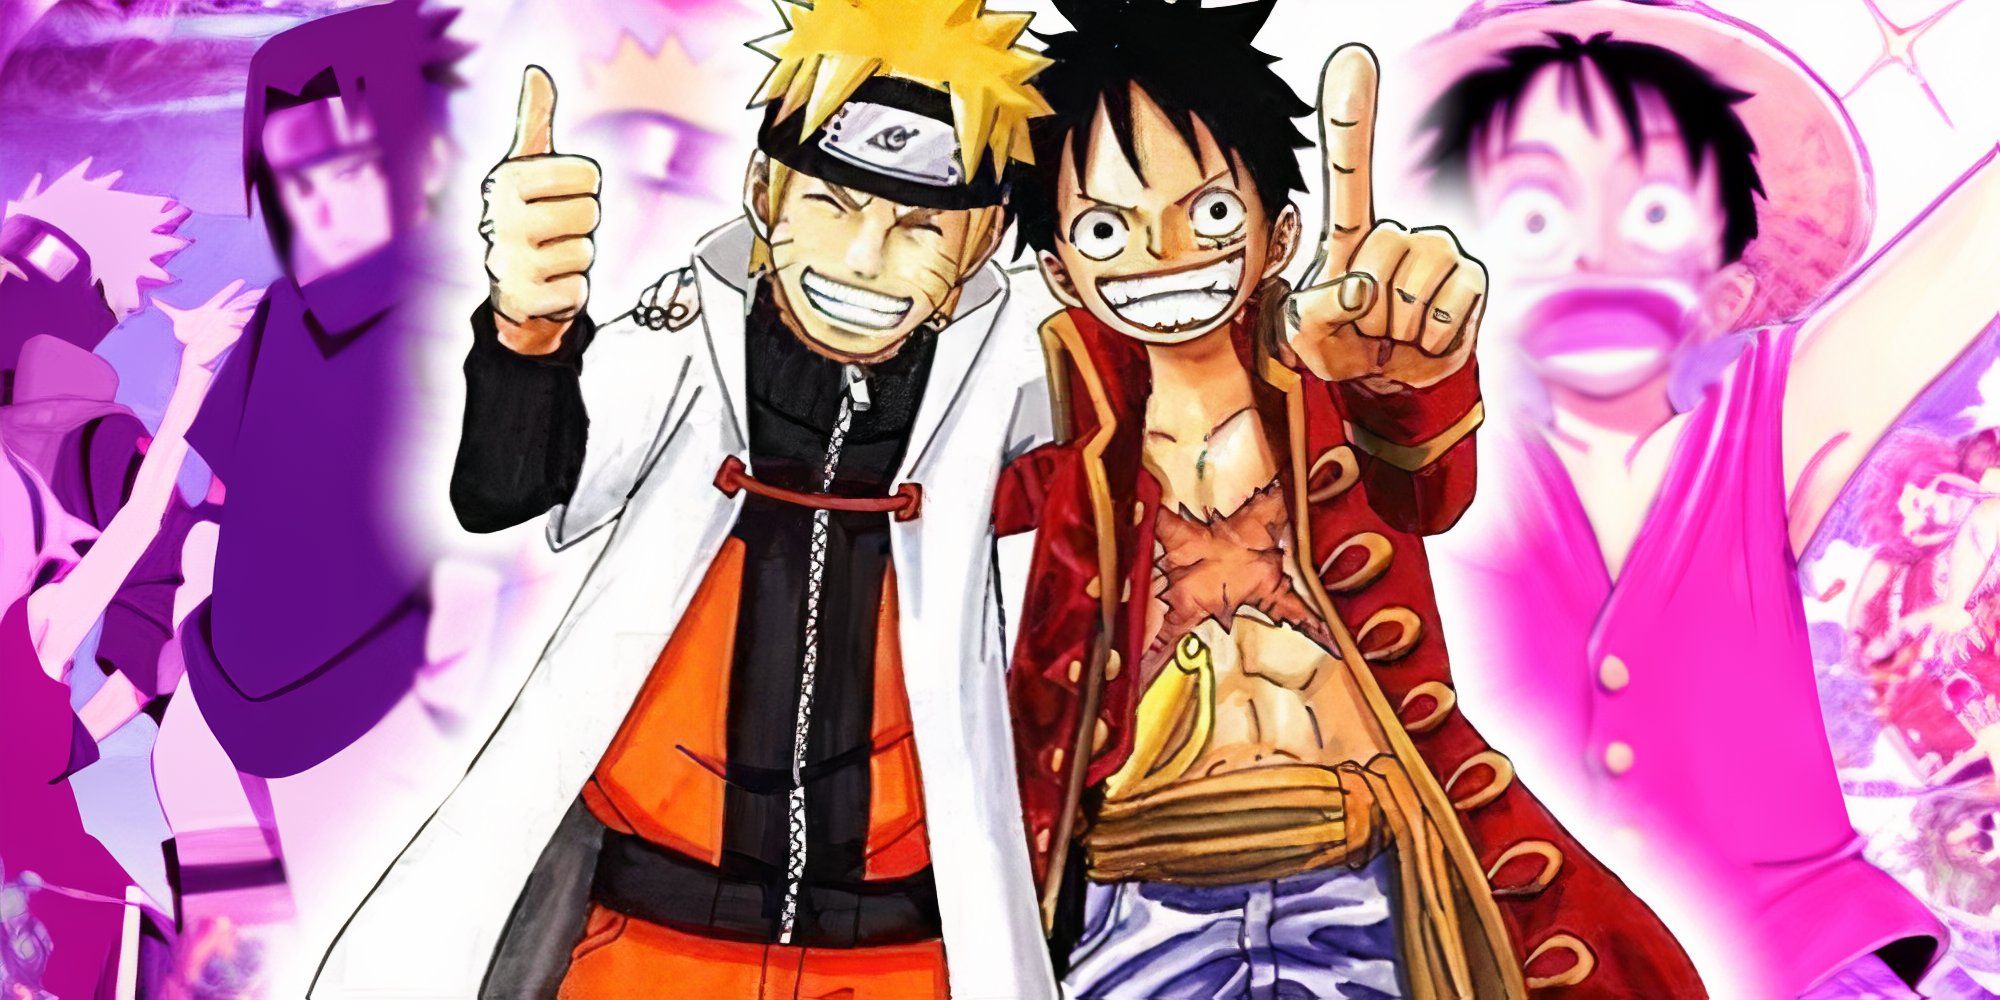 Image of Luffy and Naruto hugging each other and smiling